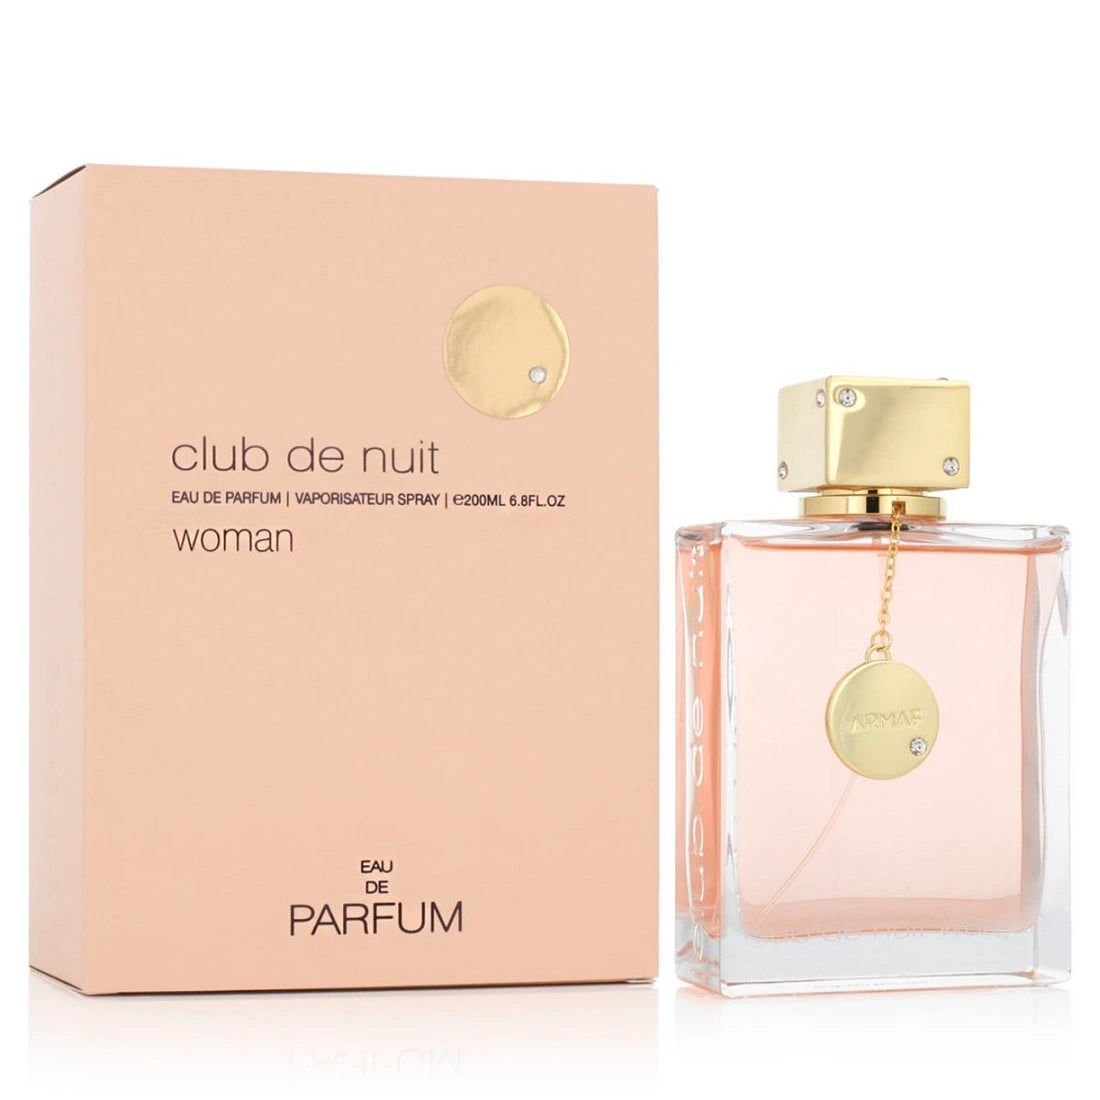 <p><span><em>INSPIRED BY</em> <strong>CHANEL CHANCE</strong></span></p>
<p>A lavish yet subtle aroma of refreshing citrus, including Grapefruit, Peach and Orange, blended with aromas of Rose, Jasmine and Litchi. Vetiver, Patchouli and Musk, exquisite with Vanilla, complete this scent.<br></p>
<div data-ved="2ahUKEwiQpJLwrsj9AhXgjLAFHUt_AYEQ7NUEegQIJxAD" id="exacc__WoGZNCxBuCZwt0Py_6FiAg_3" class="MBtdbb" jsname="rozPHf">
<div class="ymu2Hb" jsslot="">
<div data-ved="2ahUKEwiQpJLwrsj9AhXgjLAFHUt_AYEQu04oAHoECCcQBA" data-hveid="CCcQBA" id="__WoGZNCxBuCZwt0Py_6FiAg_52" class="t0bRye r2fjmd" jsname="oQYOj">
<div id="_WoGZNCxBuCZwt0Py_6FiAg__24">
<div data-md="61" class="wDYxhc">
<div data-hveid="CCMQAA" role="heading" aria-level="3" data-attrid="wa:/description" class="LGOjhe">
<span lang="en" class="ILfuVd"><span class="hgKElc"></span></span><br>
</div>
</div>
</div>
</div>
</div>
</div>